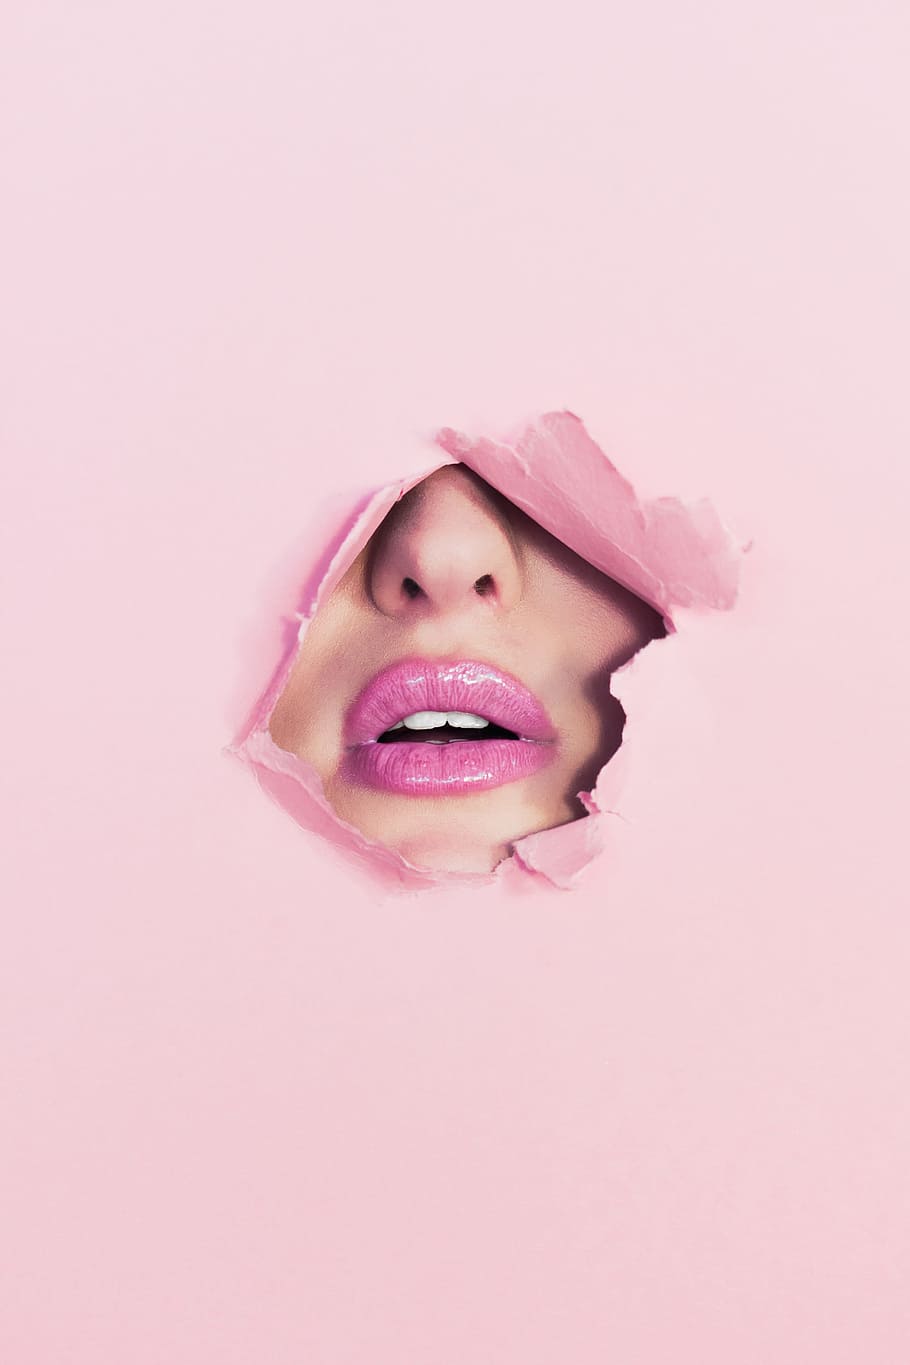 Lipstick Makeup Wallpapers  Apps on Google Play